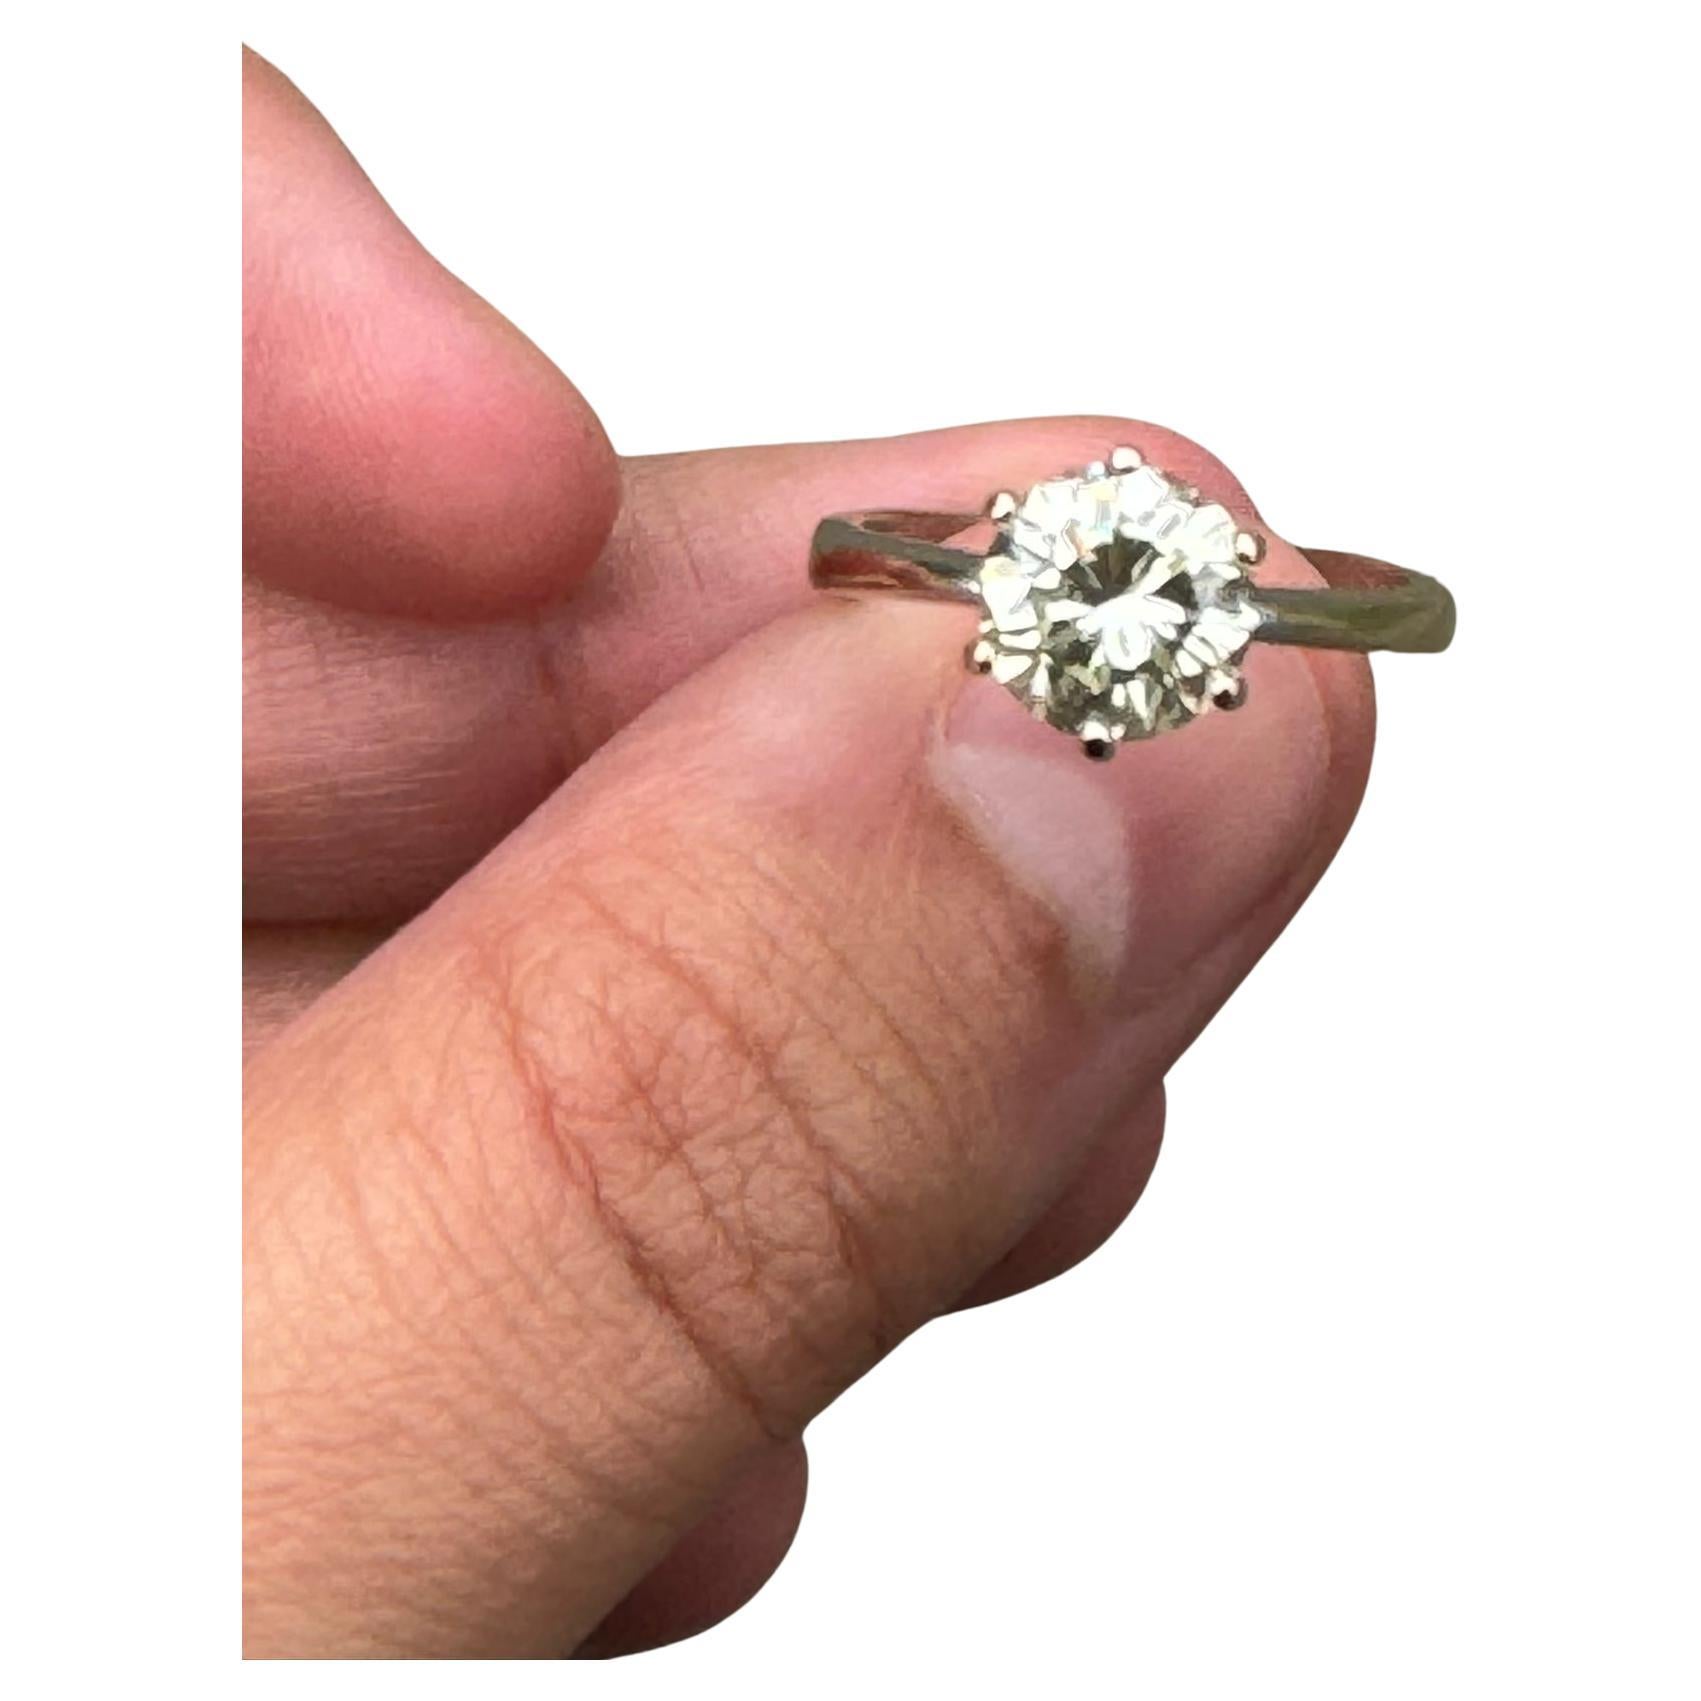 This Beautiful Diamond ring features a centre round brilliant cut Natural diamond weighing 2.24 carats. The diamond is M colour and VS2 clarity.

Details: 
• Gold : 18K White Gold
• Ring size: 7.5
• Gemstone: Diamond
• Type : Natural
• Shape & Cut :